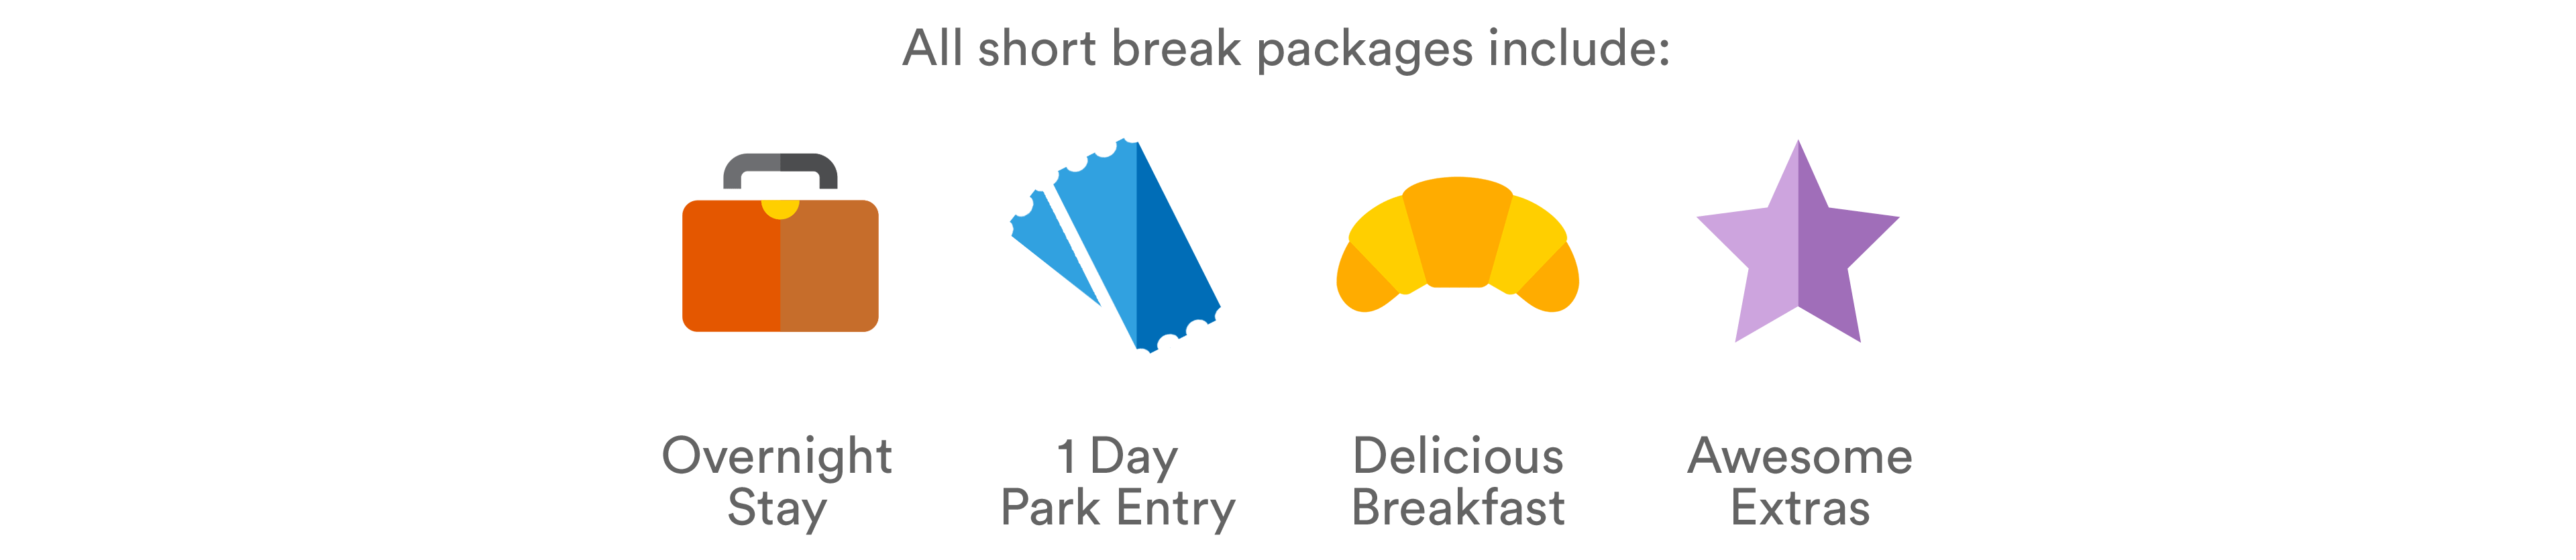 All Official LEGOLAND Holidays include: an overnight stay, 1-Day Park Entry, a delicious breakfast and awesome extras!